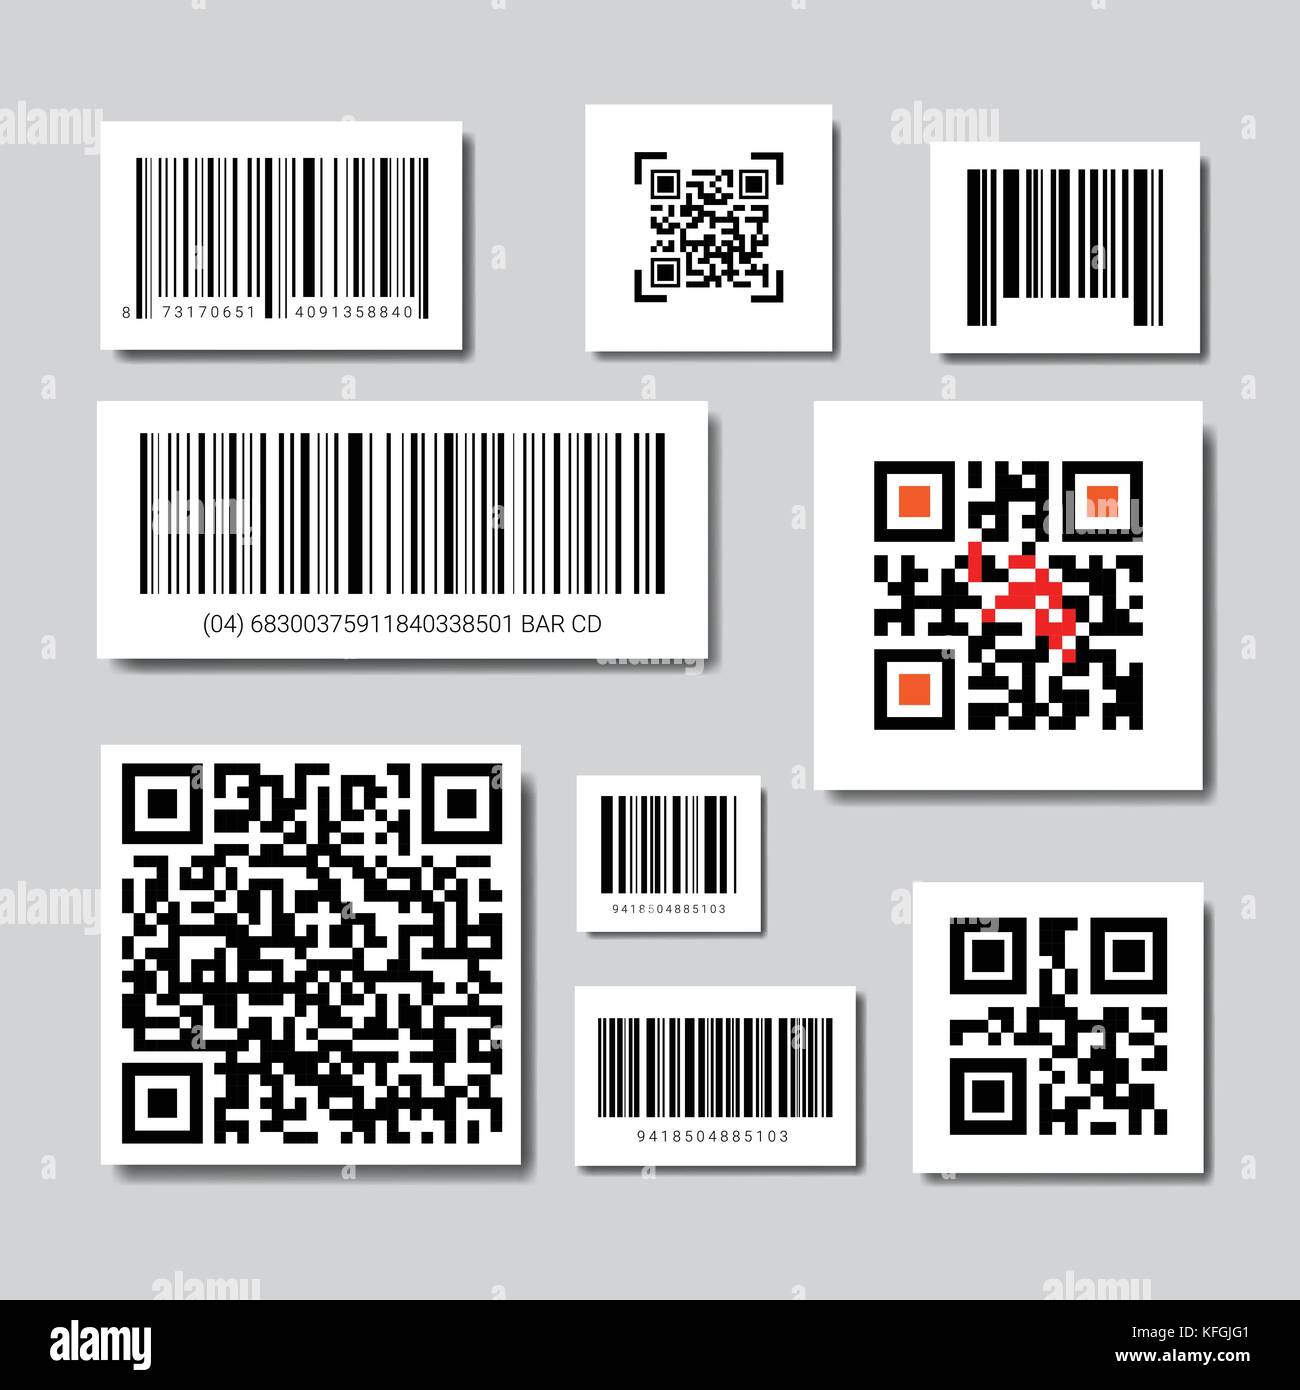 Set Of Bar And Qr Codes For Scanning Icons Collection Stock Vector